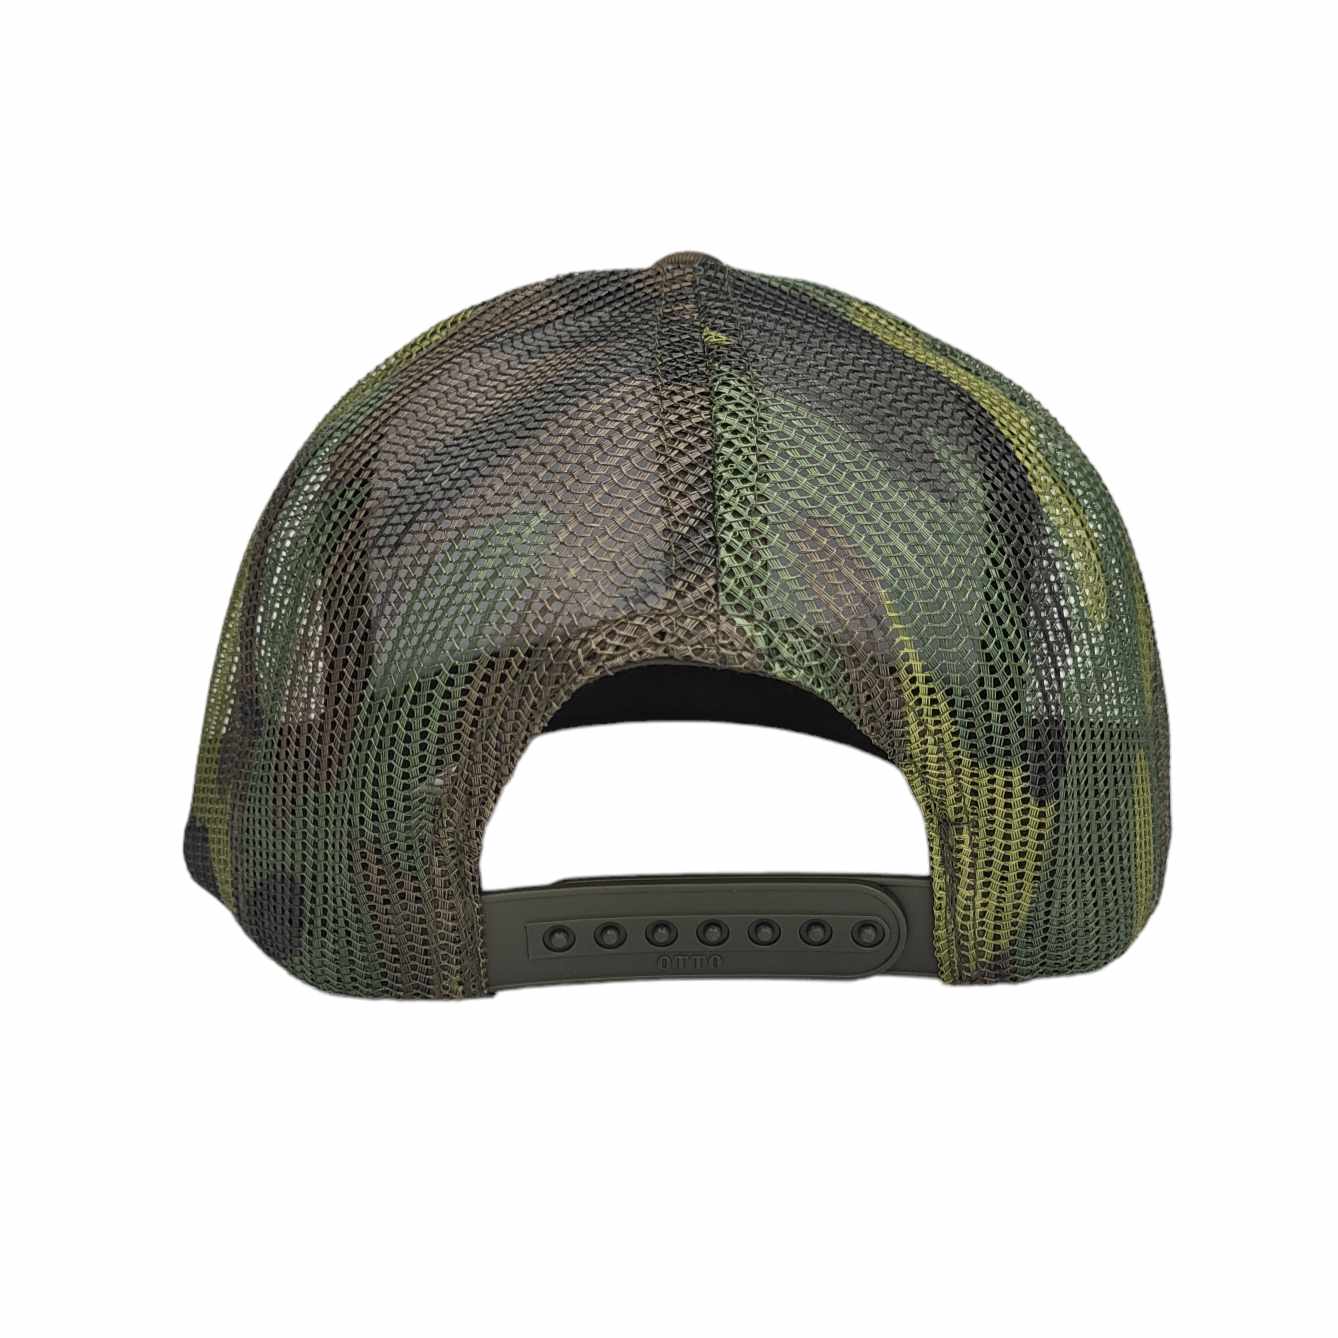 Fish Around And Find Out Cork Patch Hat